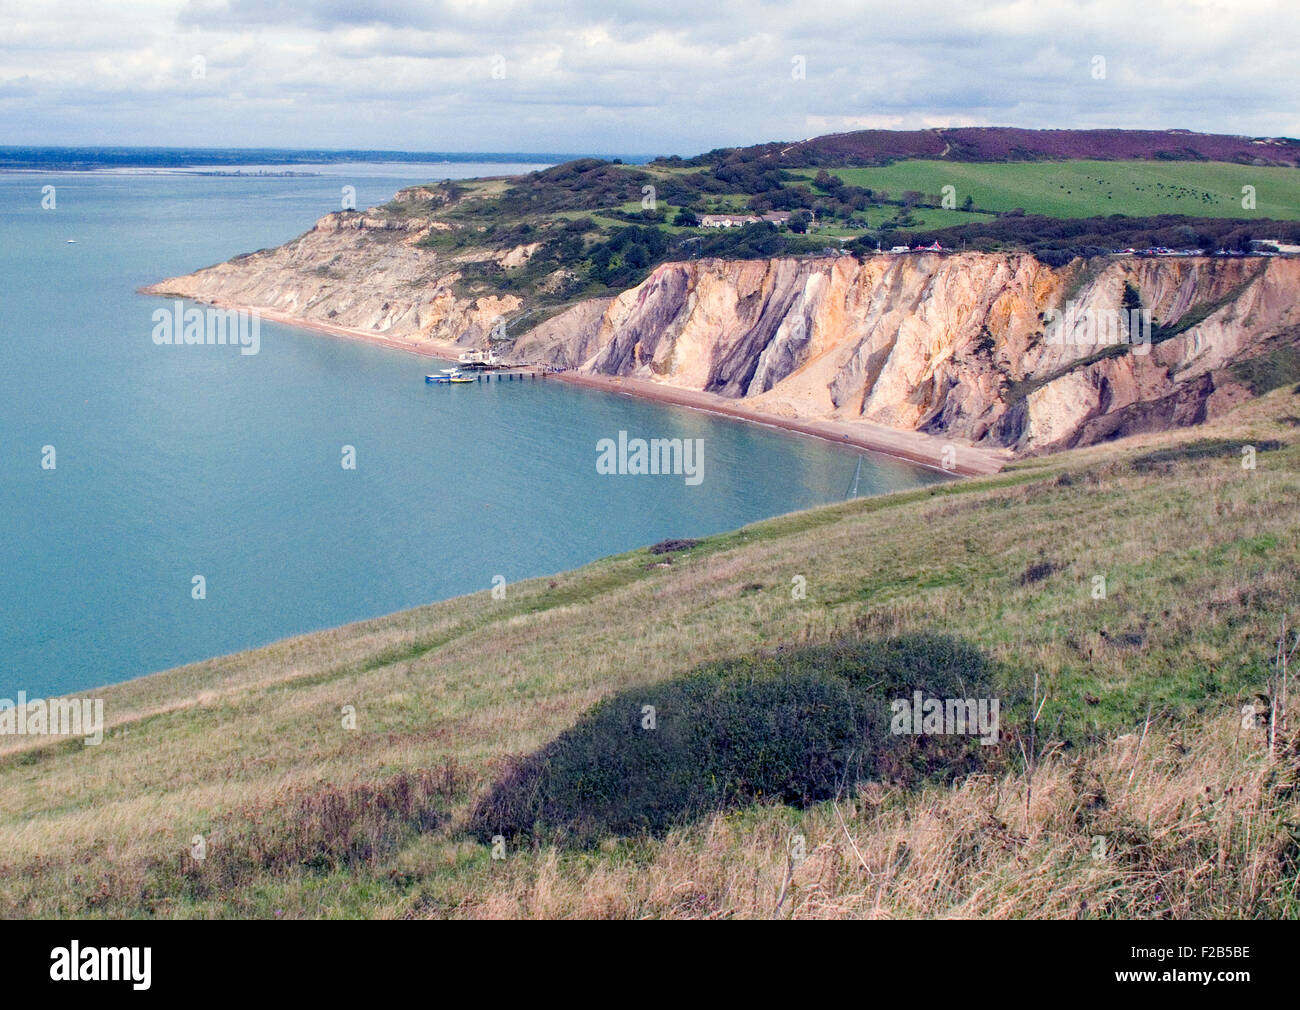 A view of Alum Bay from the cliff leading to The Needles on the most western point of the Isle of Wight. Of geological interest and a tourist attraction, the bay is noted for its multi-coloured sand cliffs. Stock Photo